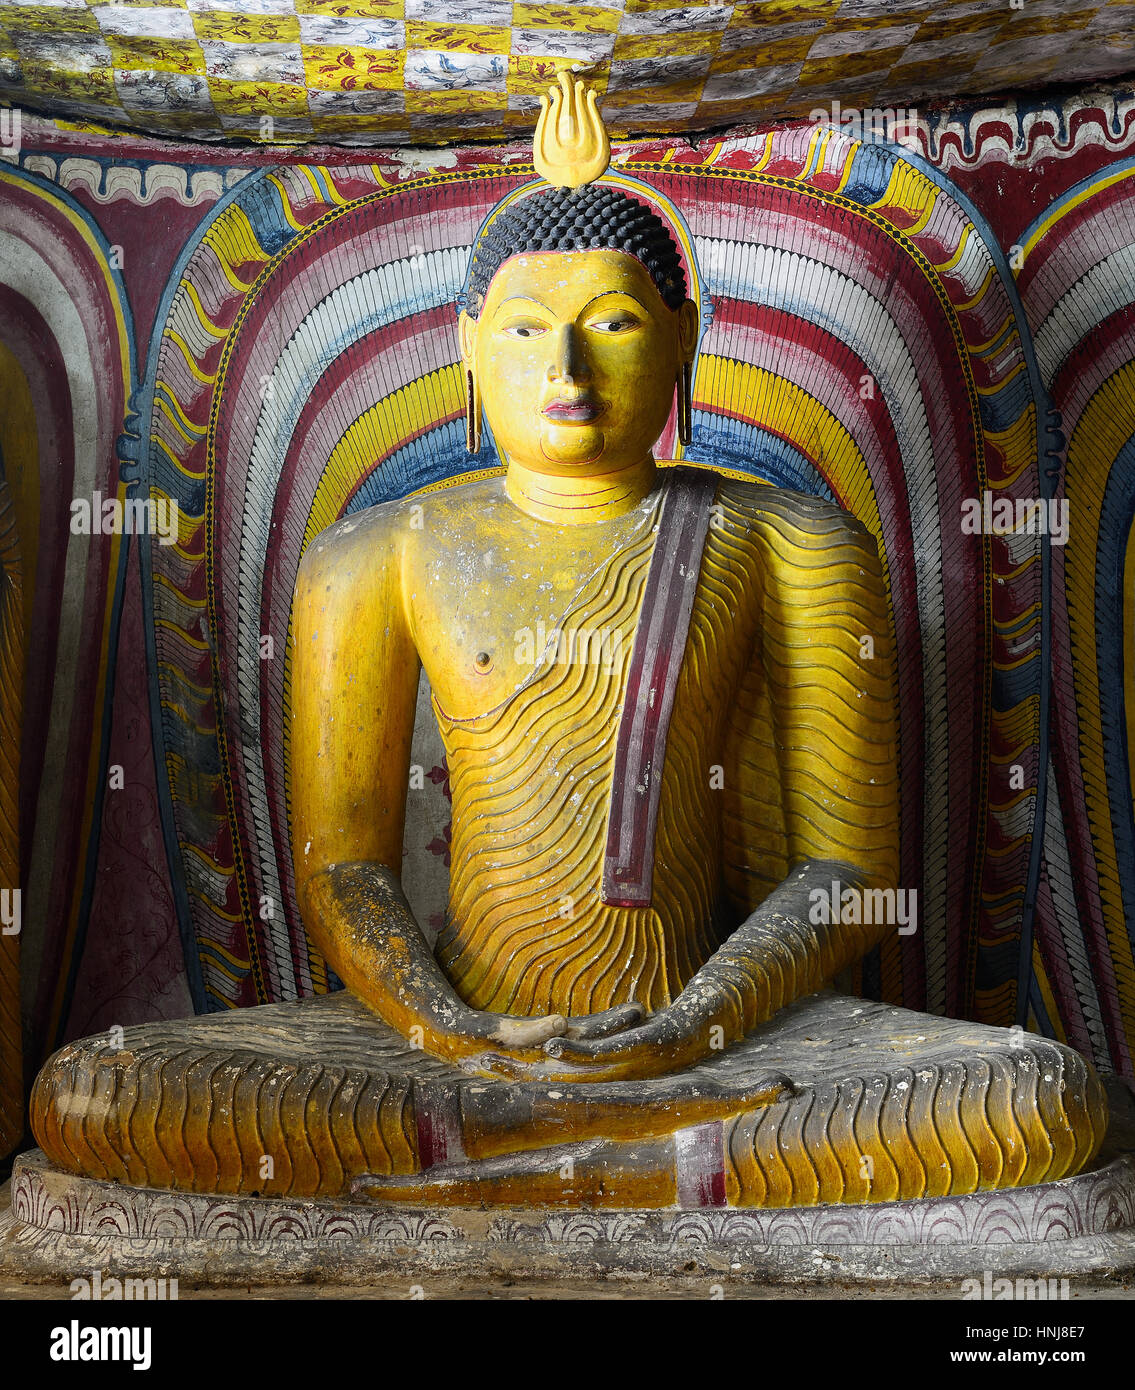 Insides of caves in ancient Buddhist complex in Dambulla cave temple. Sri Lanka. The photograph is presenting the statue of sitting Buddha Stock Photo